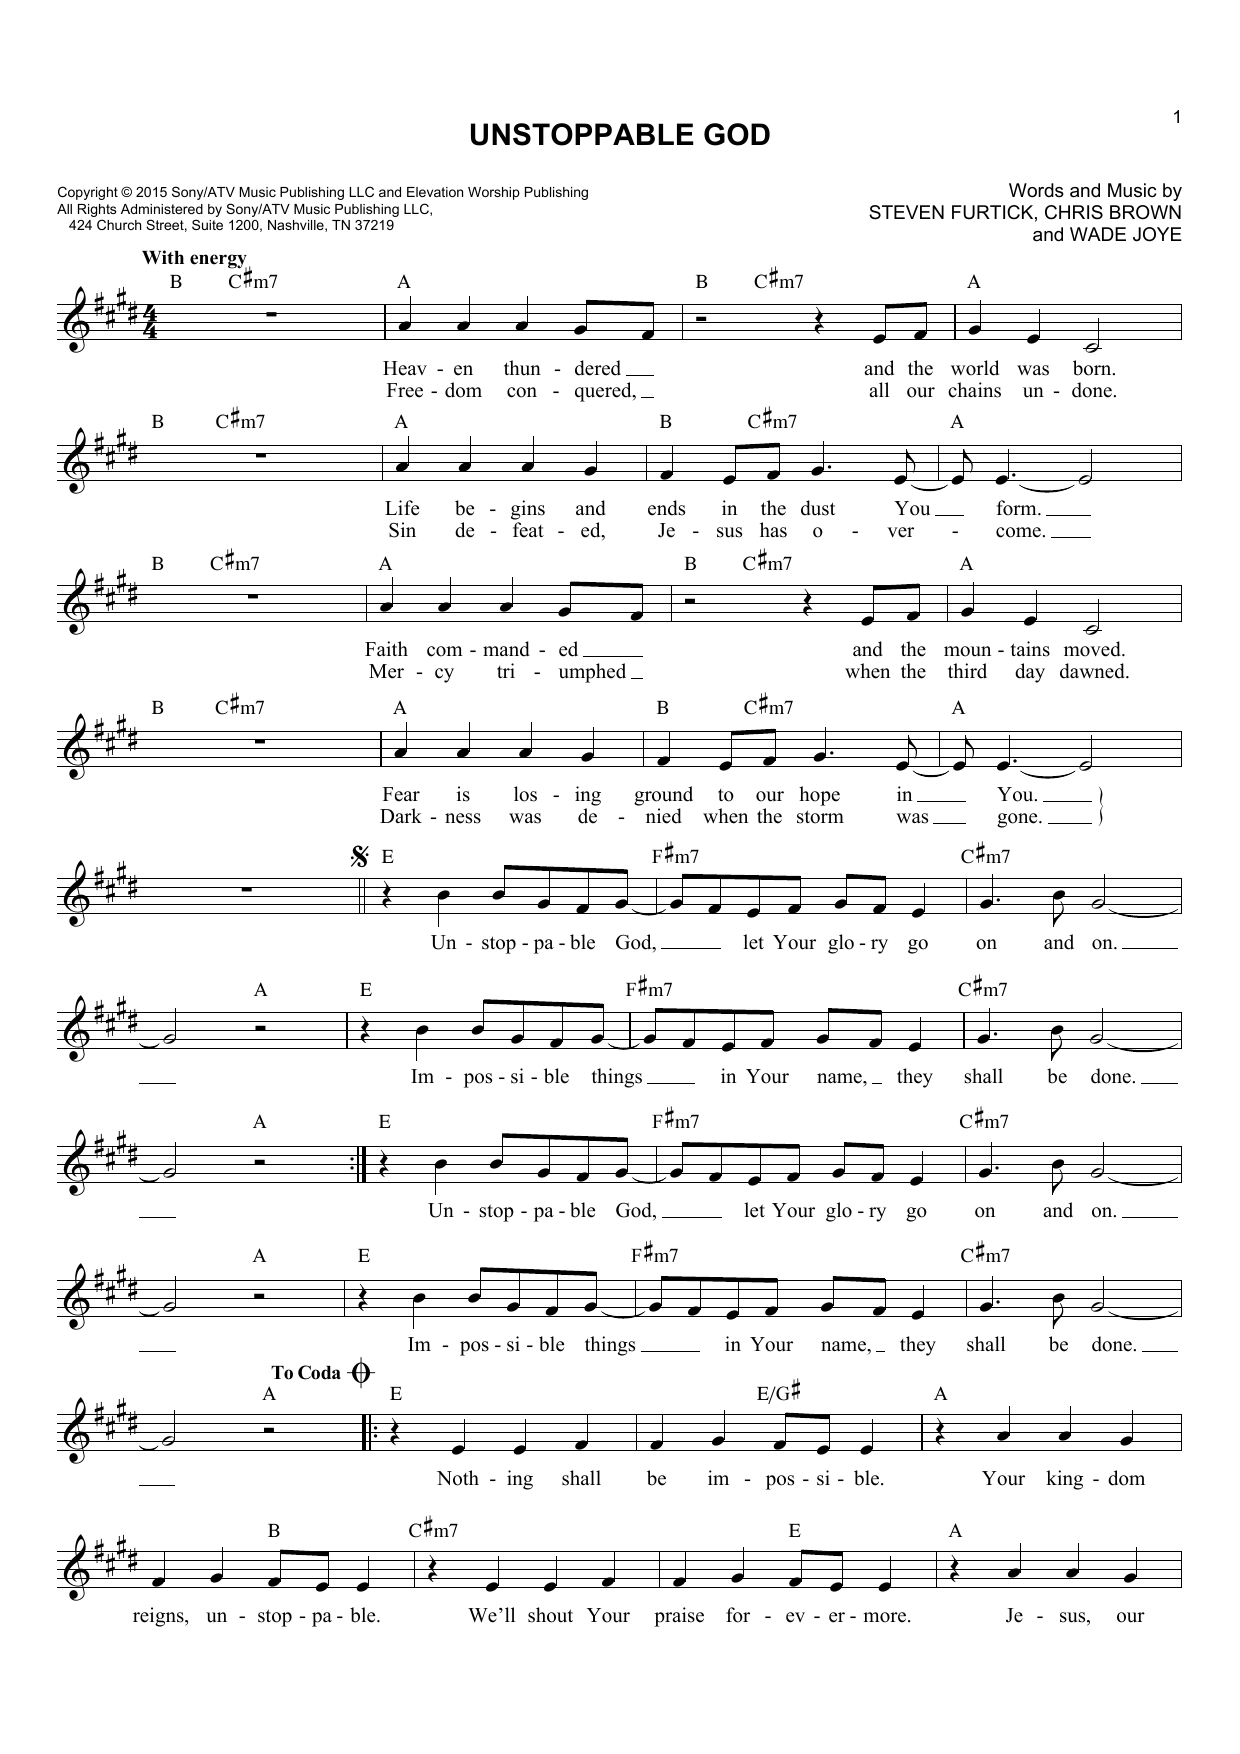 Download Chris Brown Unstoppable God Sheet Music